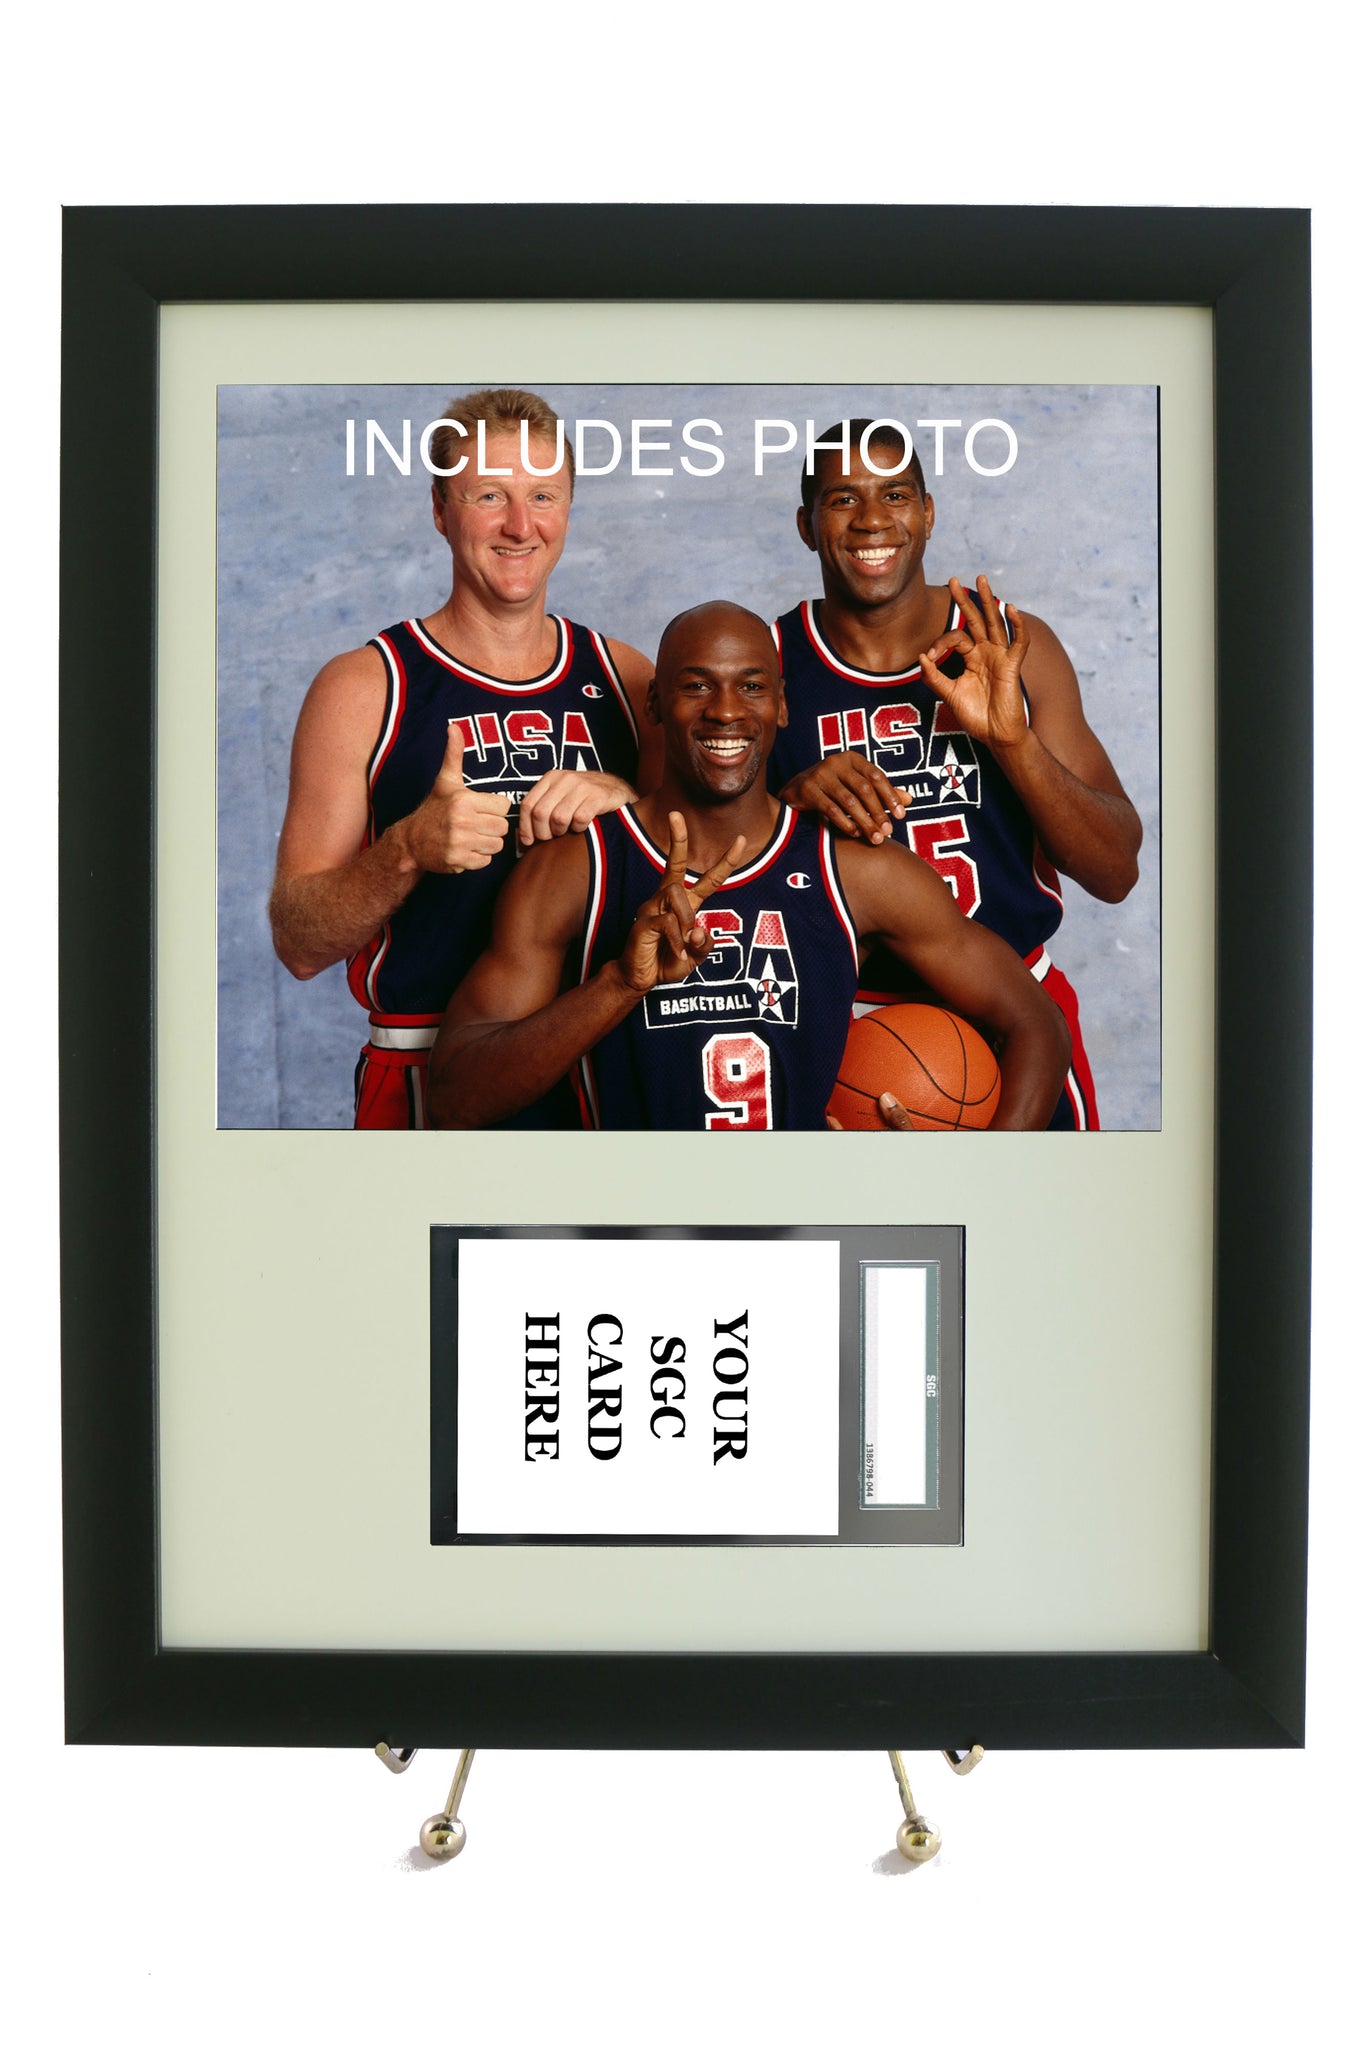 Sports Card Frame for YOUR SGC Larry Bird Card (INCLUDES PHOTO) - Graded And Framed